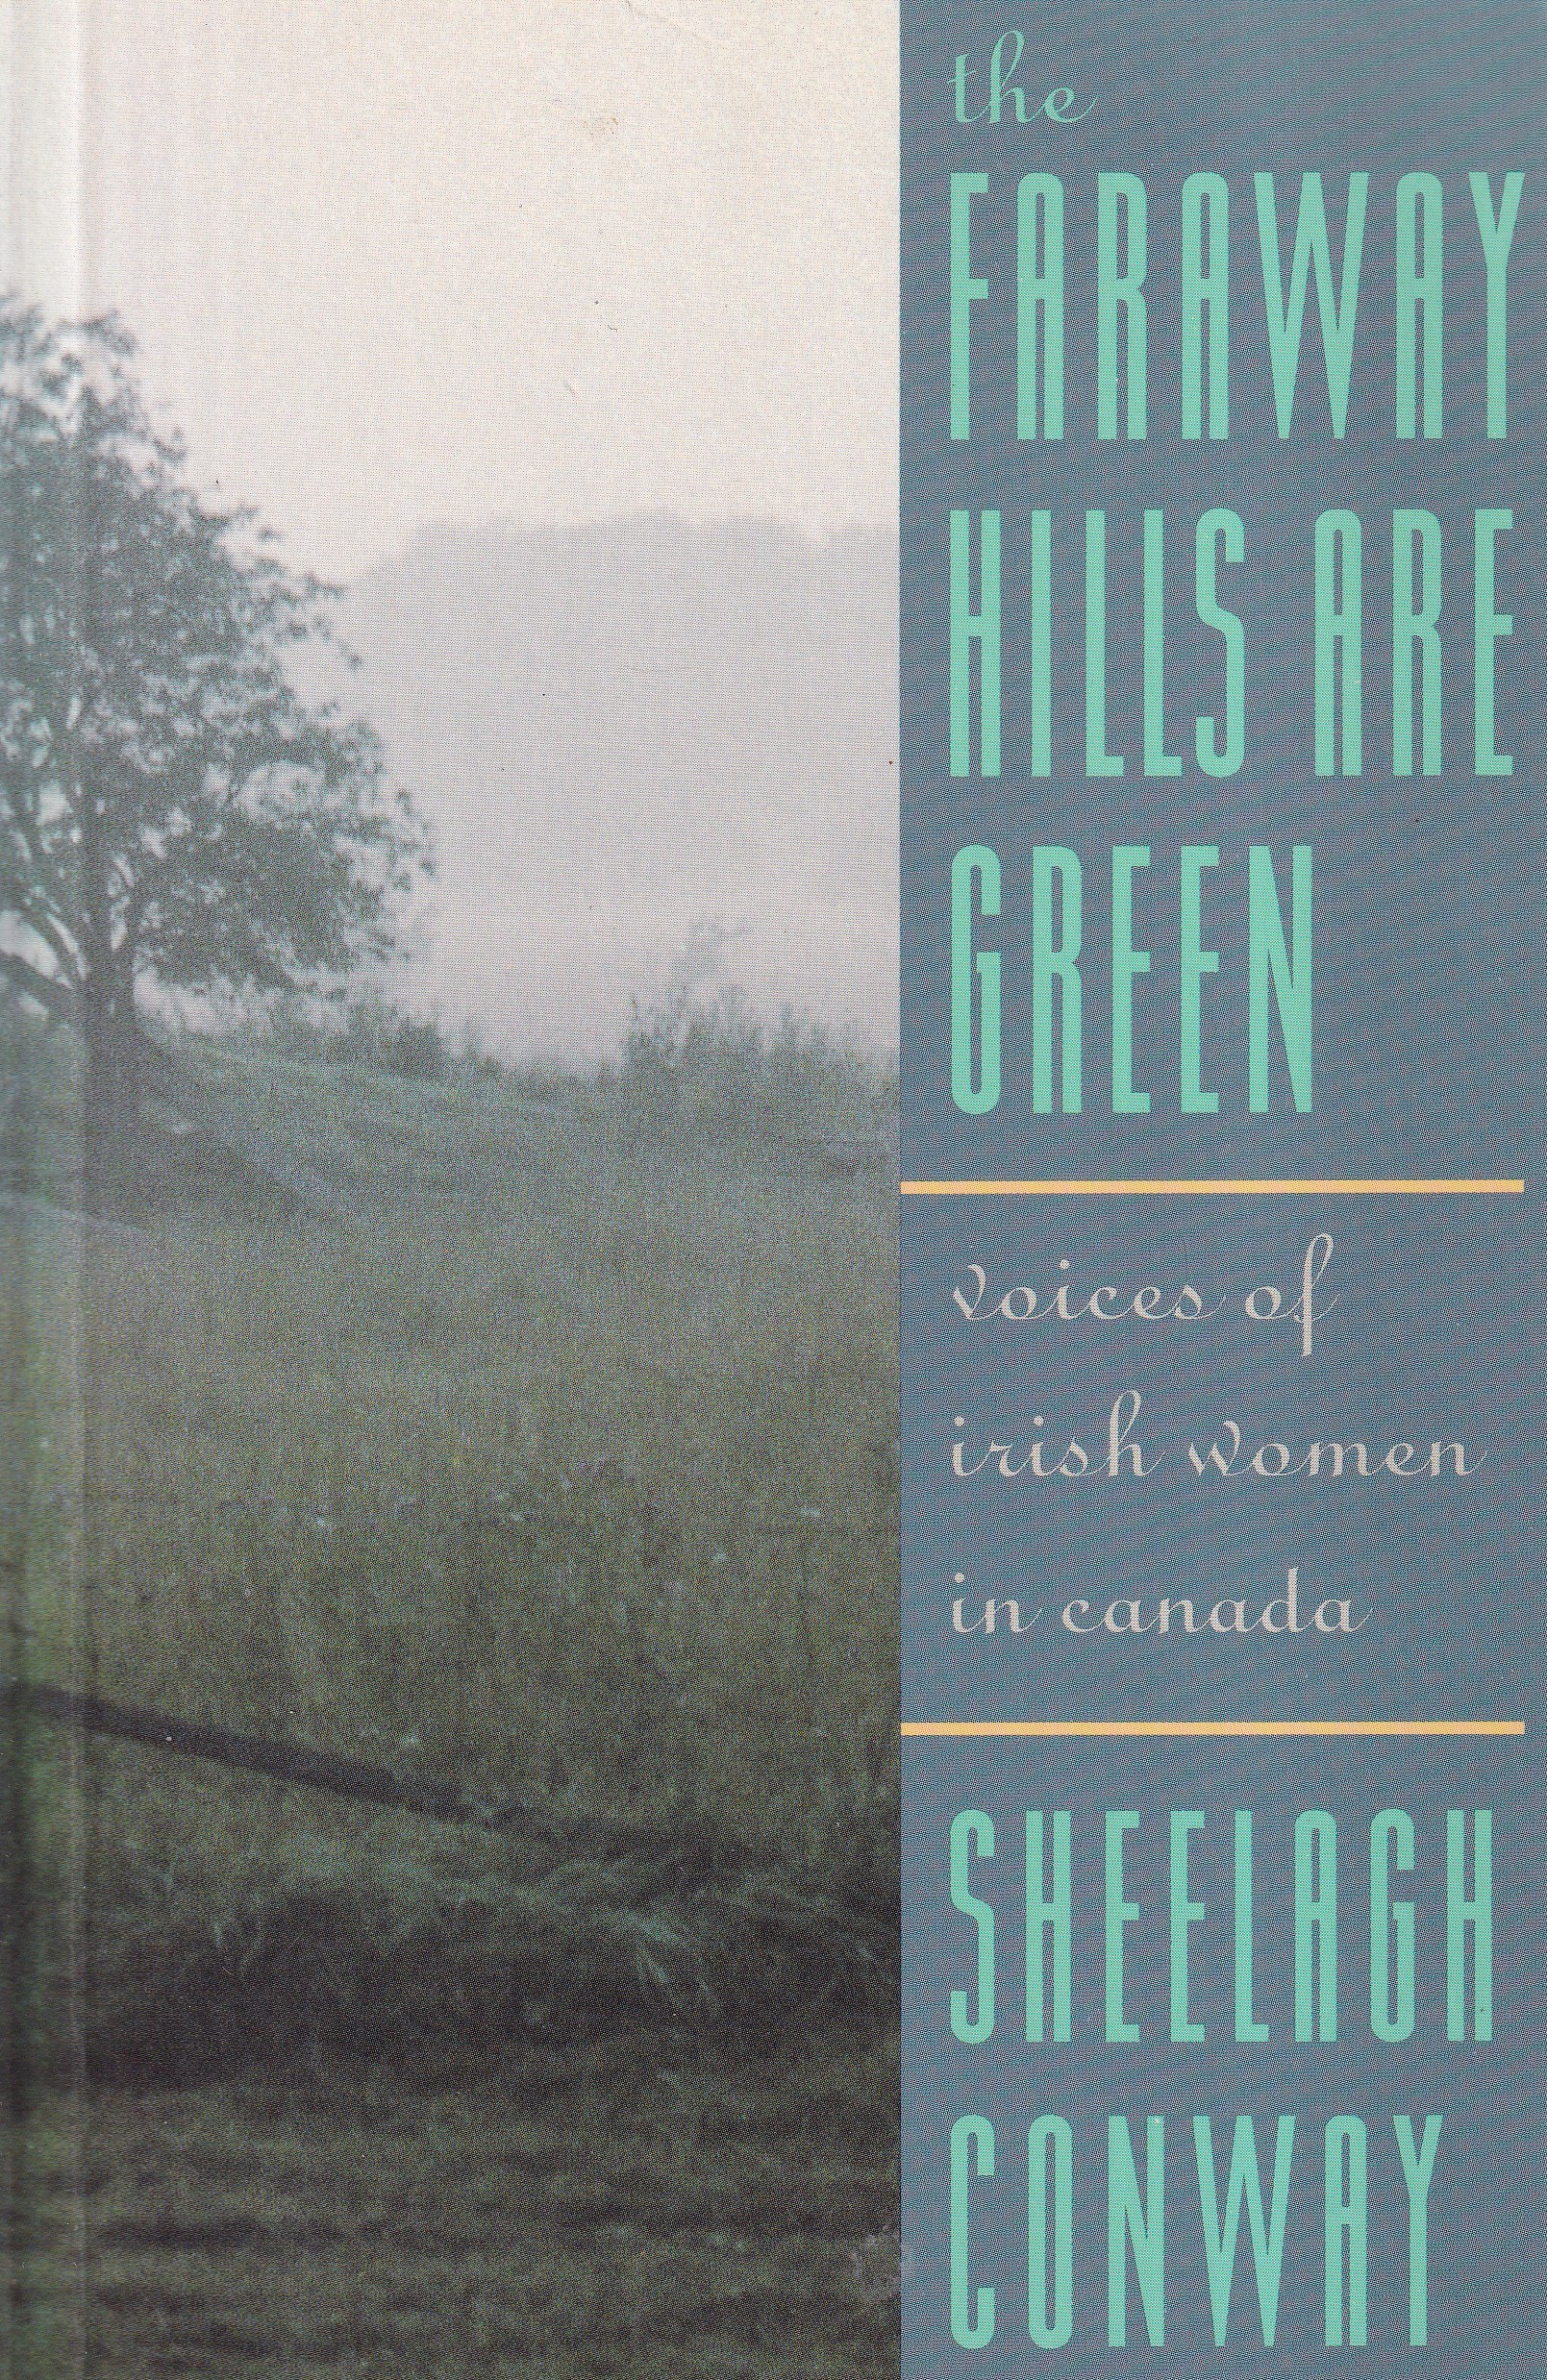 The Faraway Hills Are Green: Voices of Irish Women in Canada by Sheelagh Conway